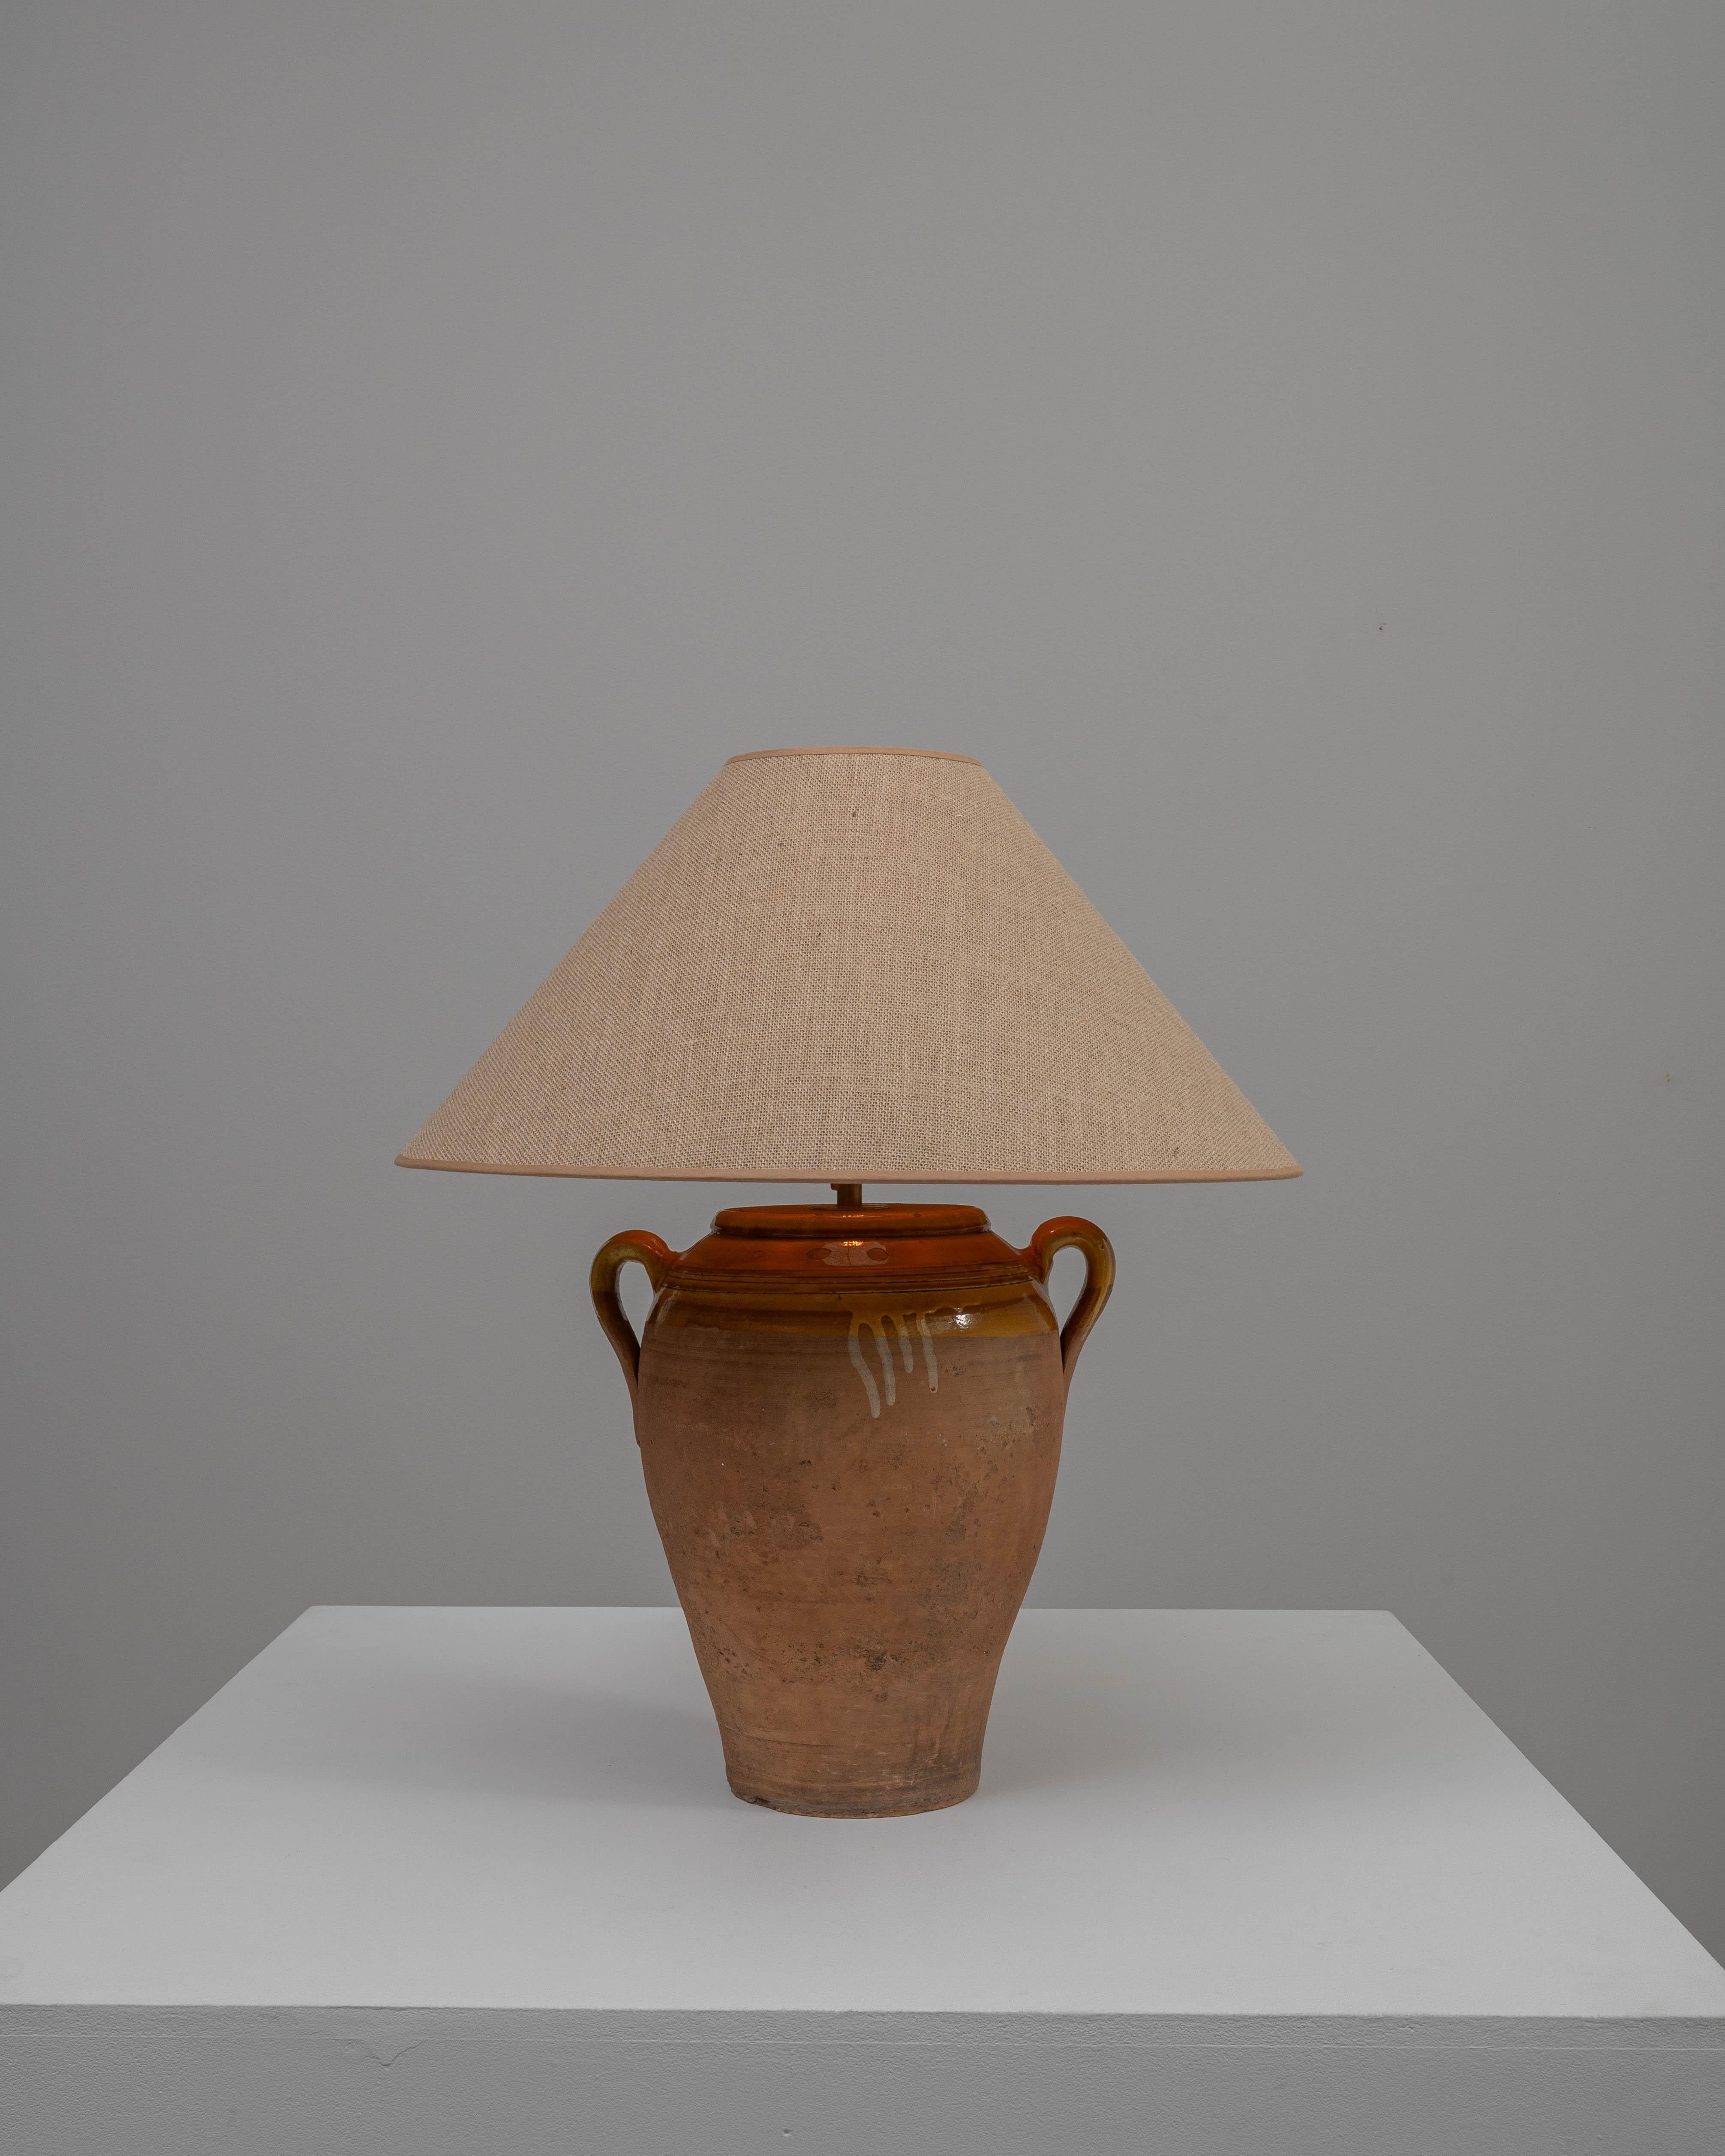 This 20th Century German Ceramic Table Lamp exudes a certain provincial charm with its antique pottery style. The terracotta-hued ceramic base, reminiscent of an amphora used in ancient times, features a gracefully aged patina and rustic glaze drips